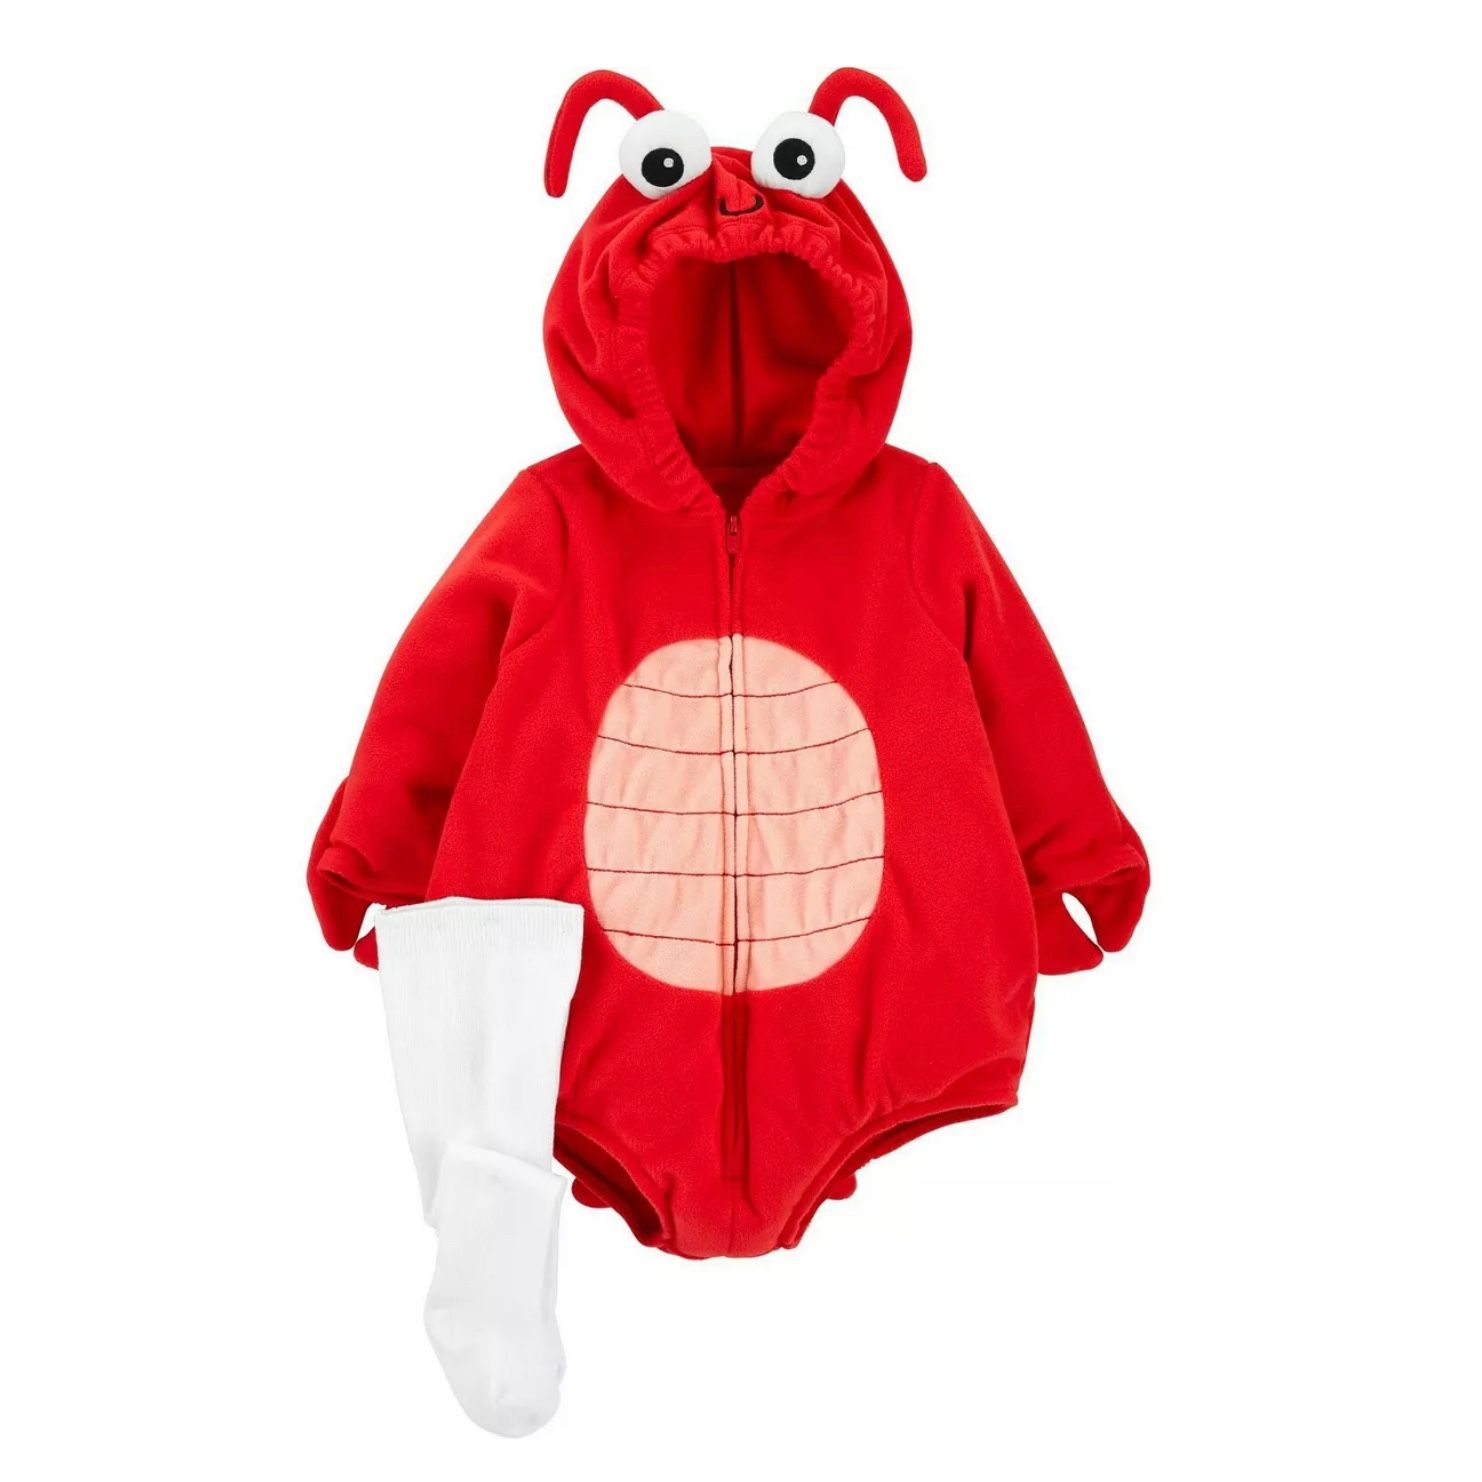 New Carter’s Baby Lobster Costume Outfit Halloween Dress Up Toddlers Kids Babies Infants